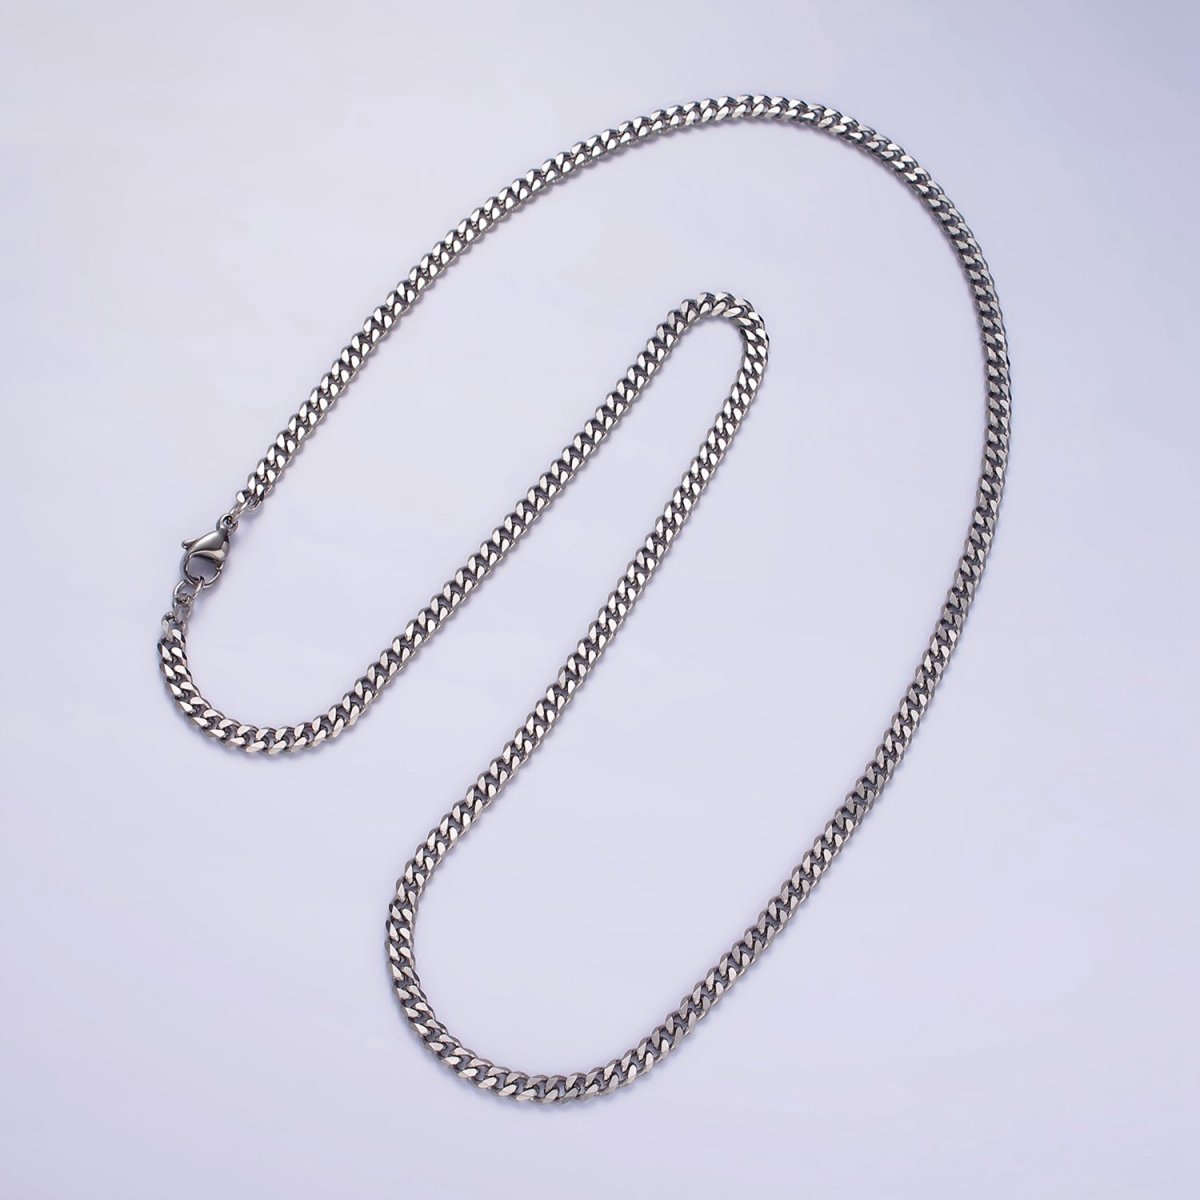 Stainless Steel 3.4 mm Curb Chain | Silver Curb Necklace | Steel Curb Chain | Men's Necklace | Men's Stainless Steel Chain | Tarnish Resistant | WA-2147 to WA-2150 Clearance Pricing - DLUXCA